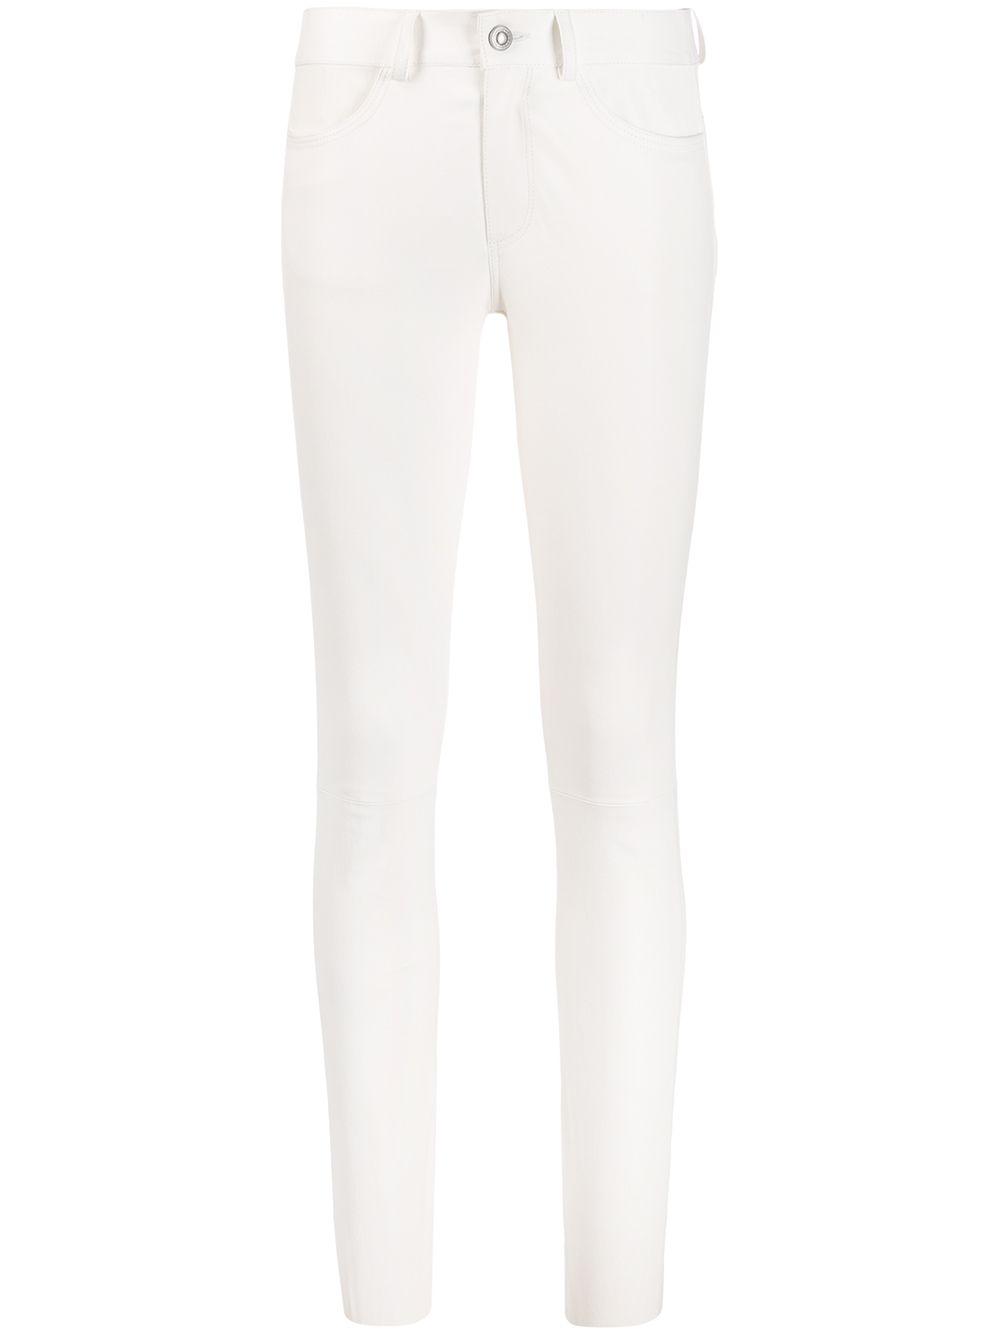 Inès & Maréchal Skinny Leather Trousers In 白色